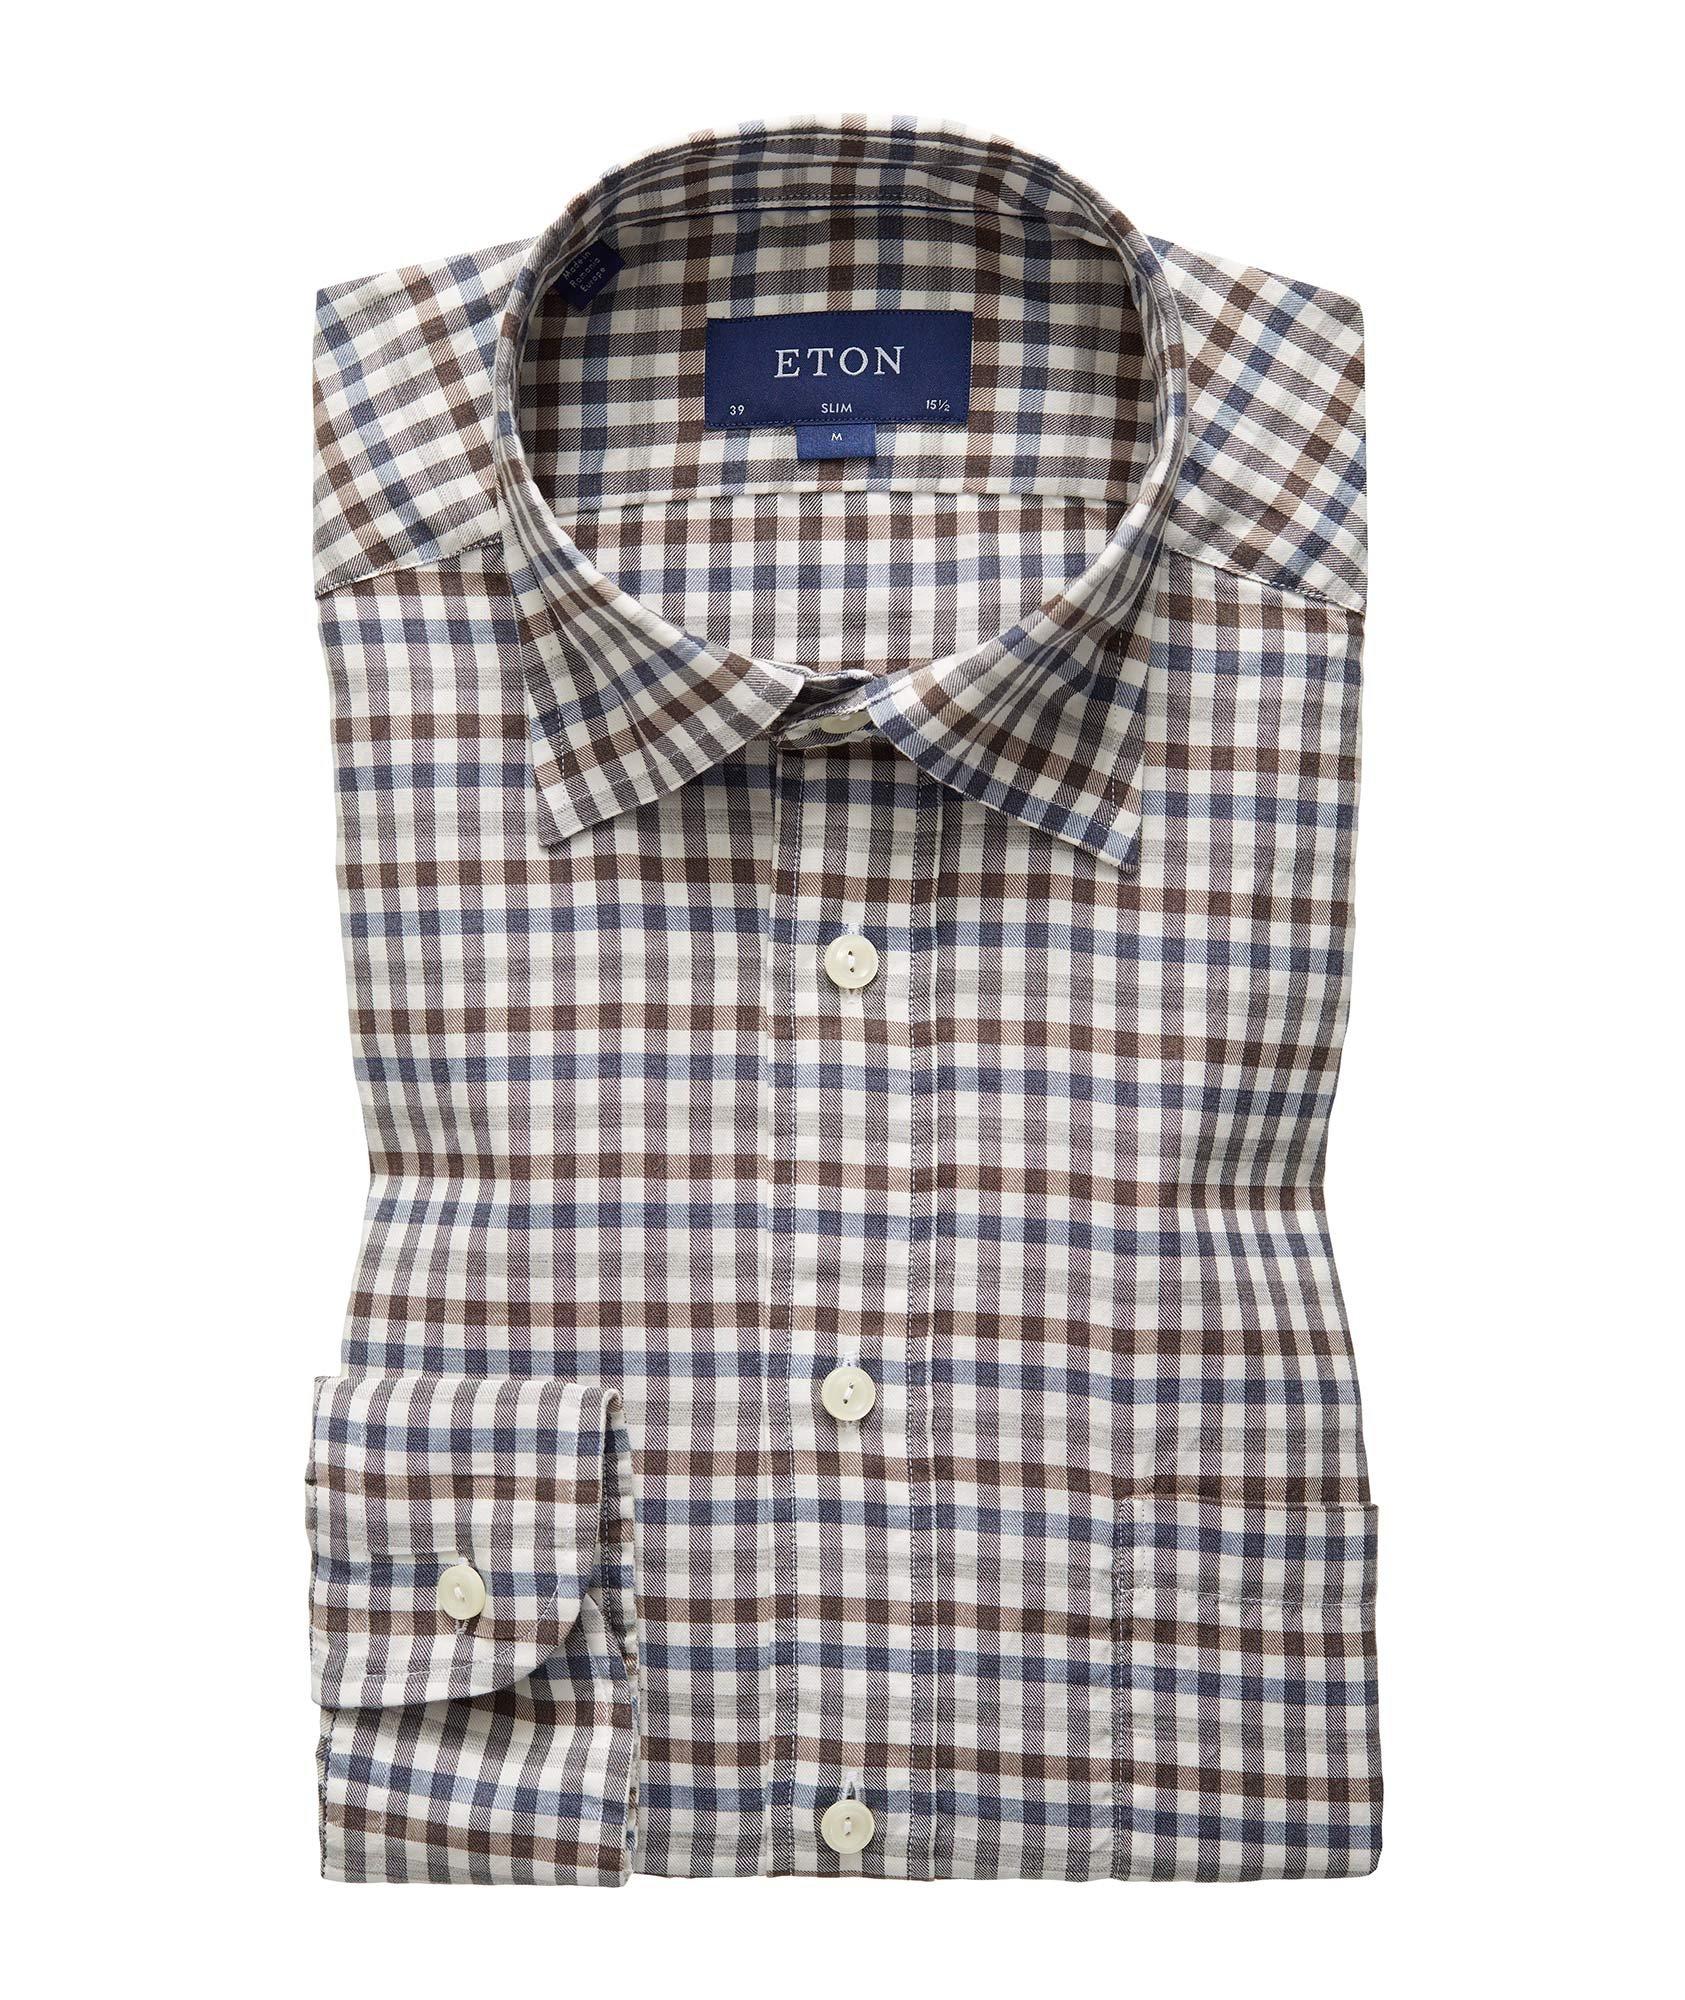 Soft Slim Fit Gingham-Checked Shirt image 0